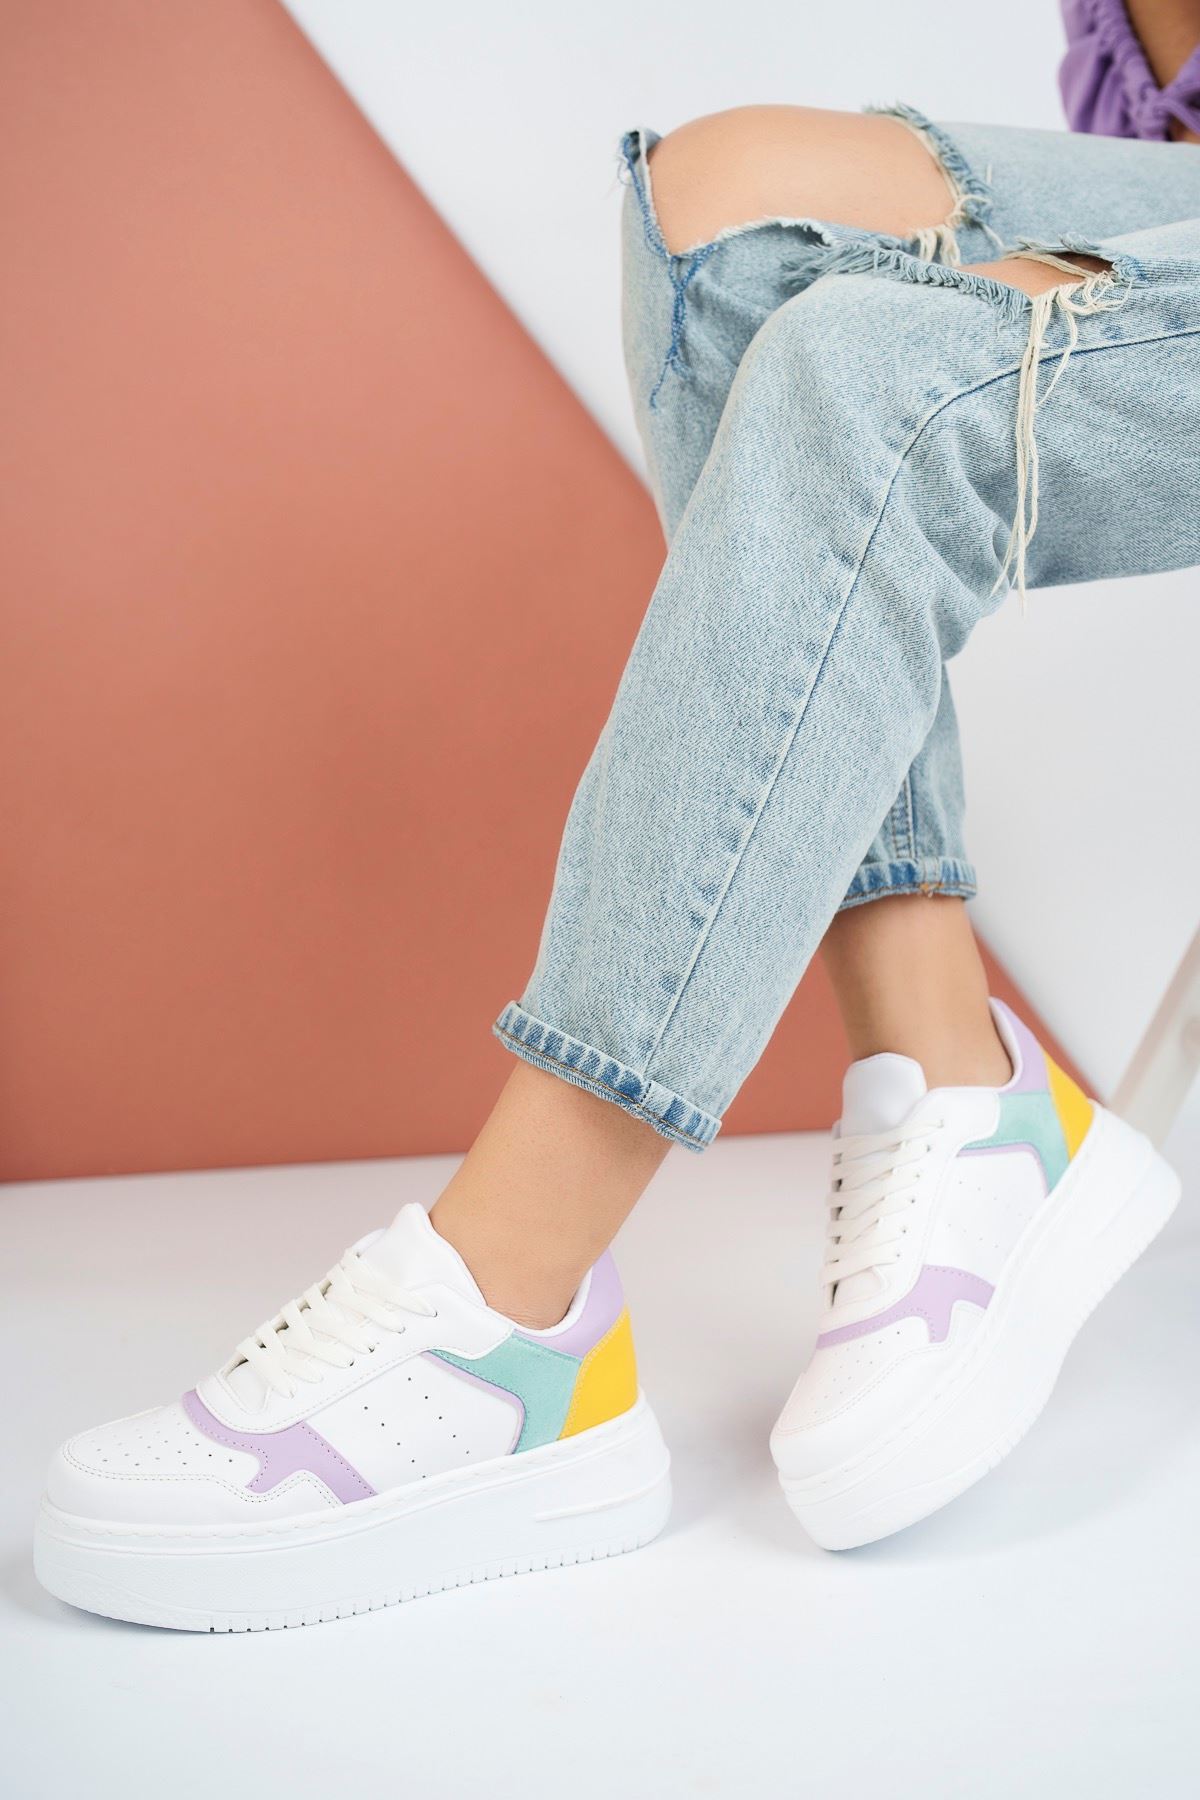 Poly Sole Mekval Stitching Lilac Garnished White Sneakers